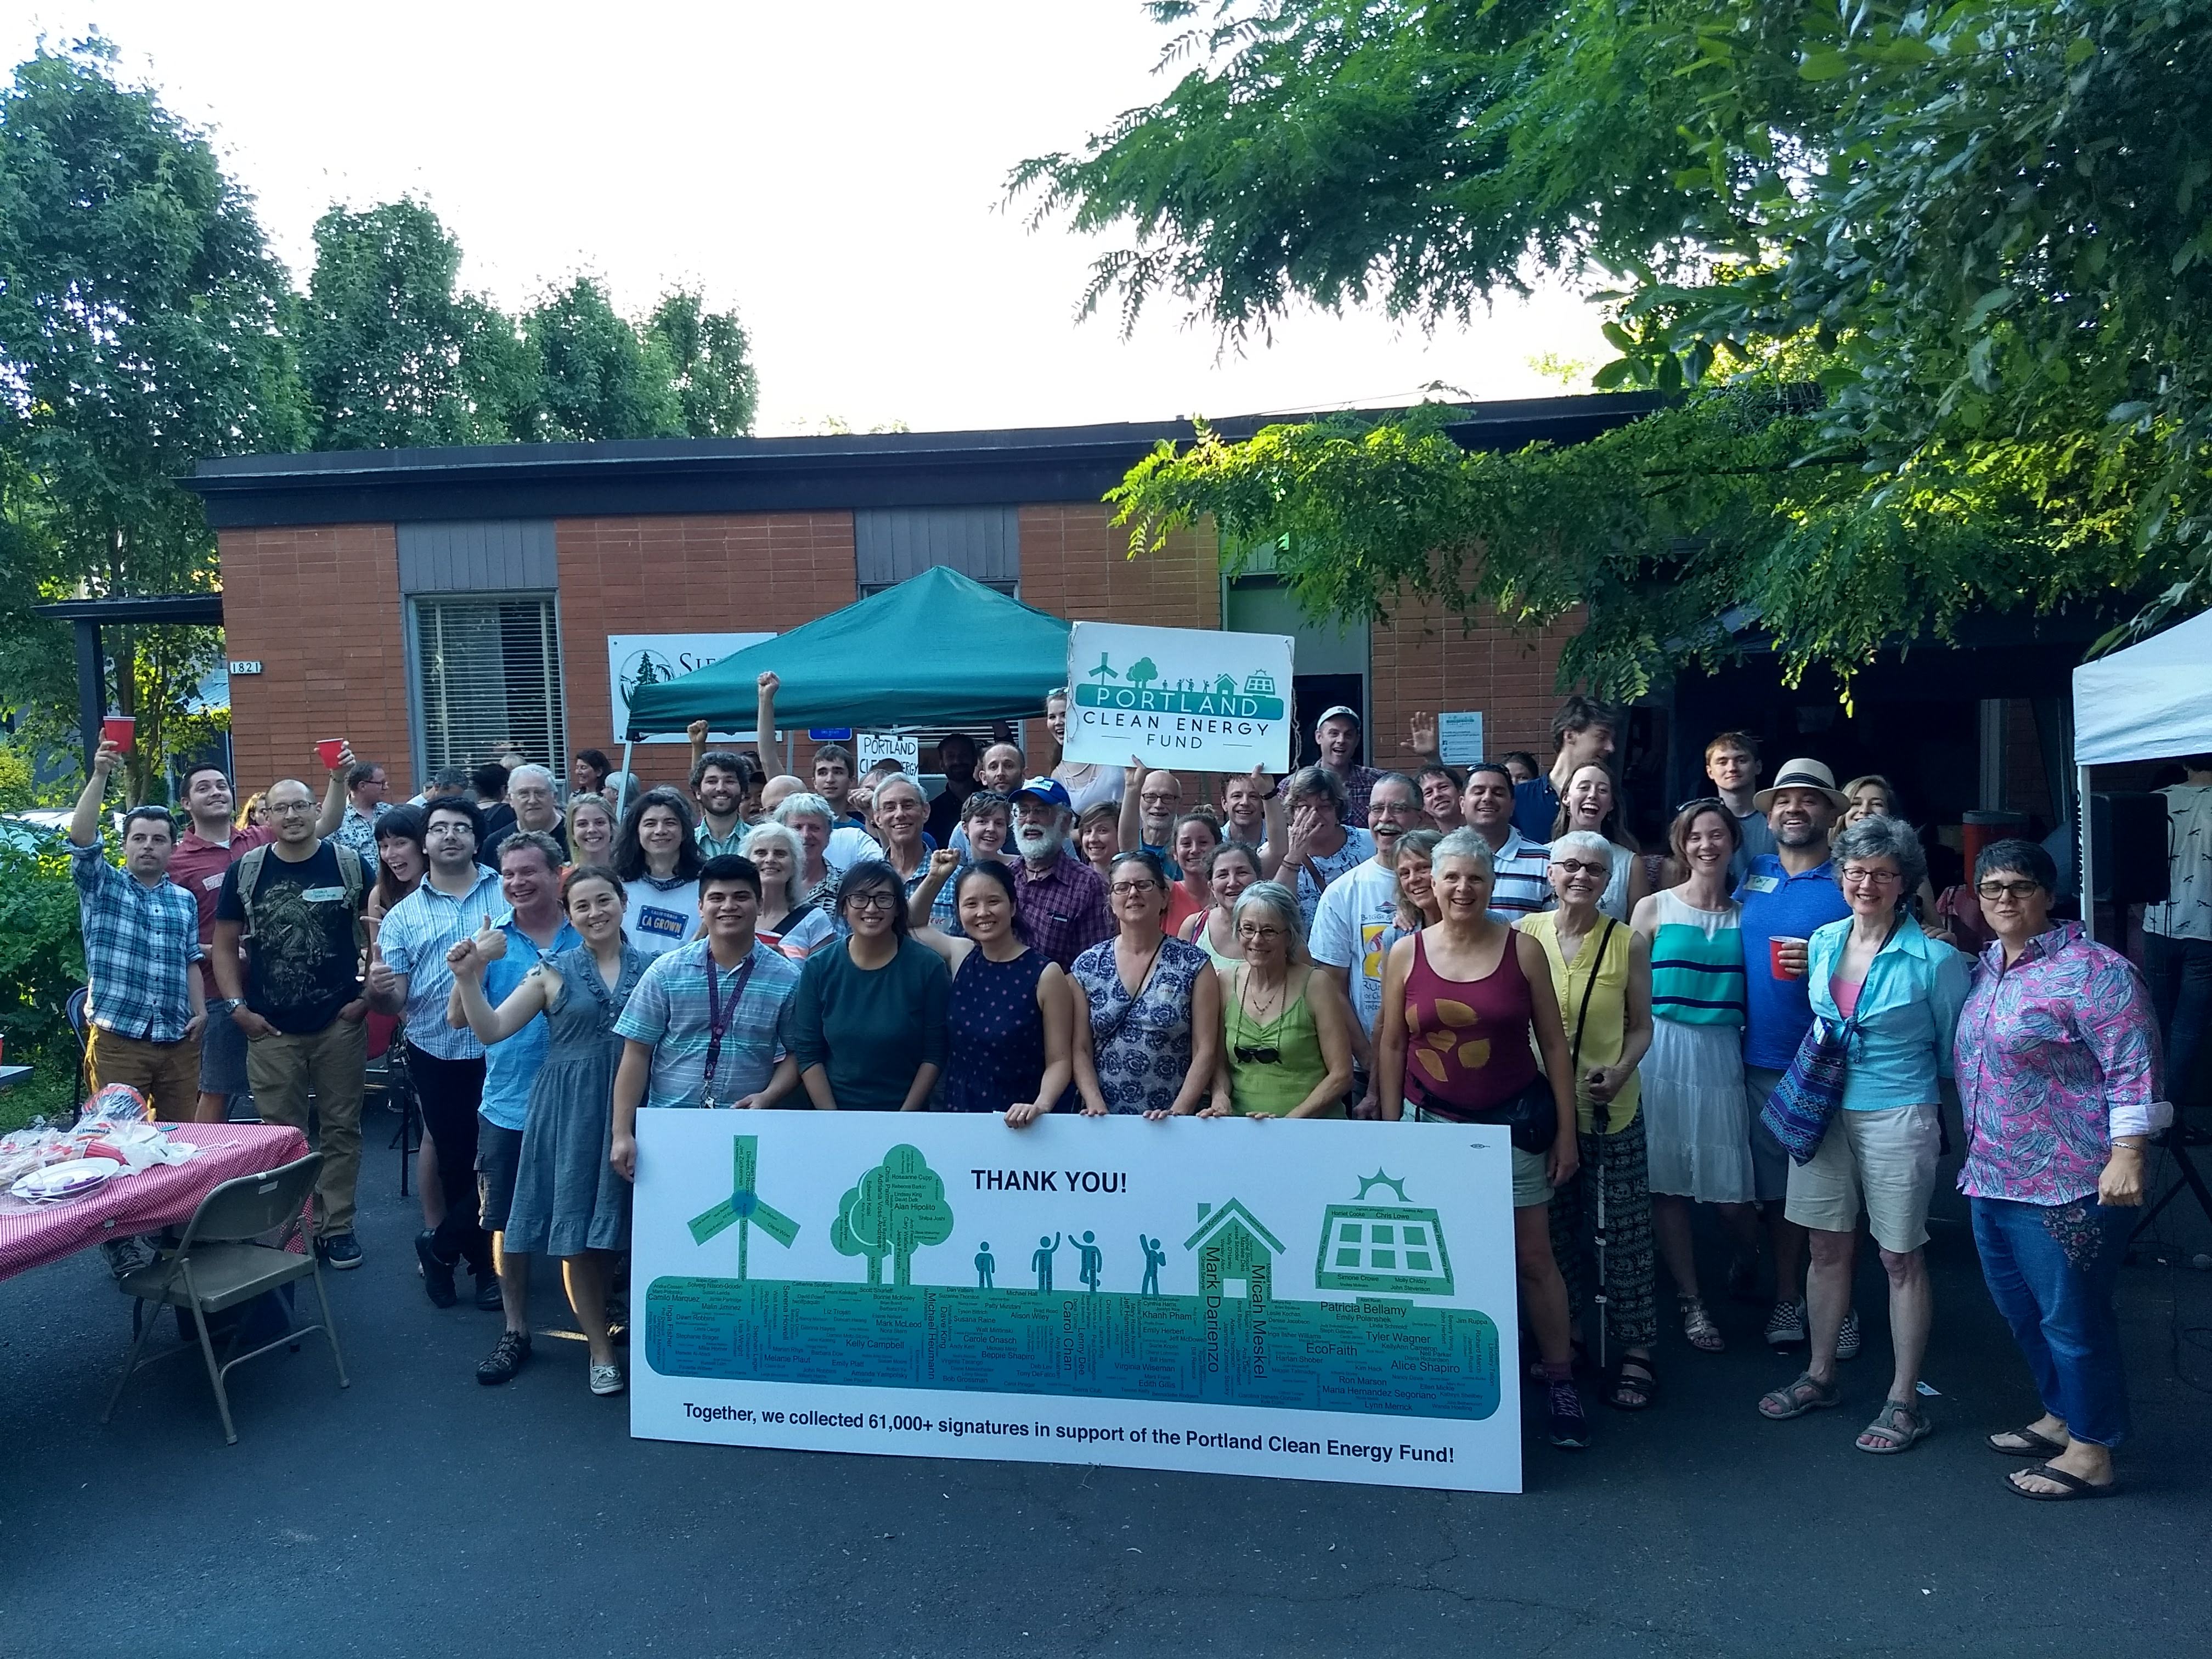 Portland Clean Energy Fund supporters